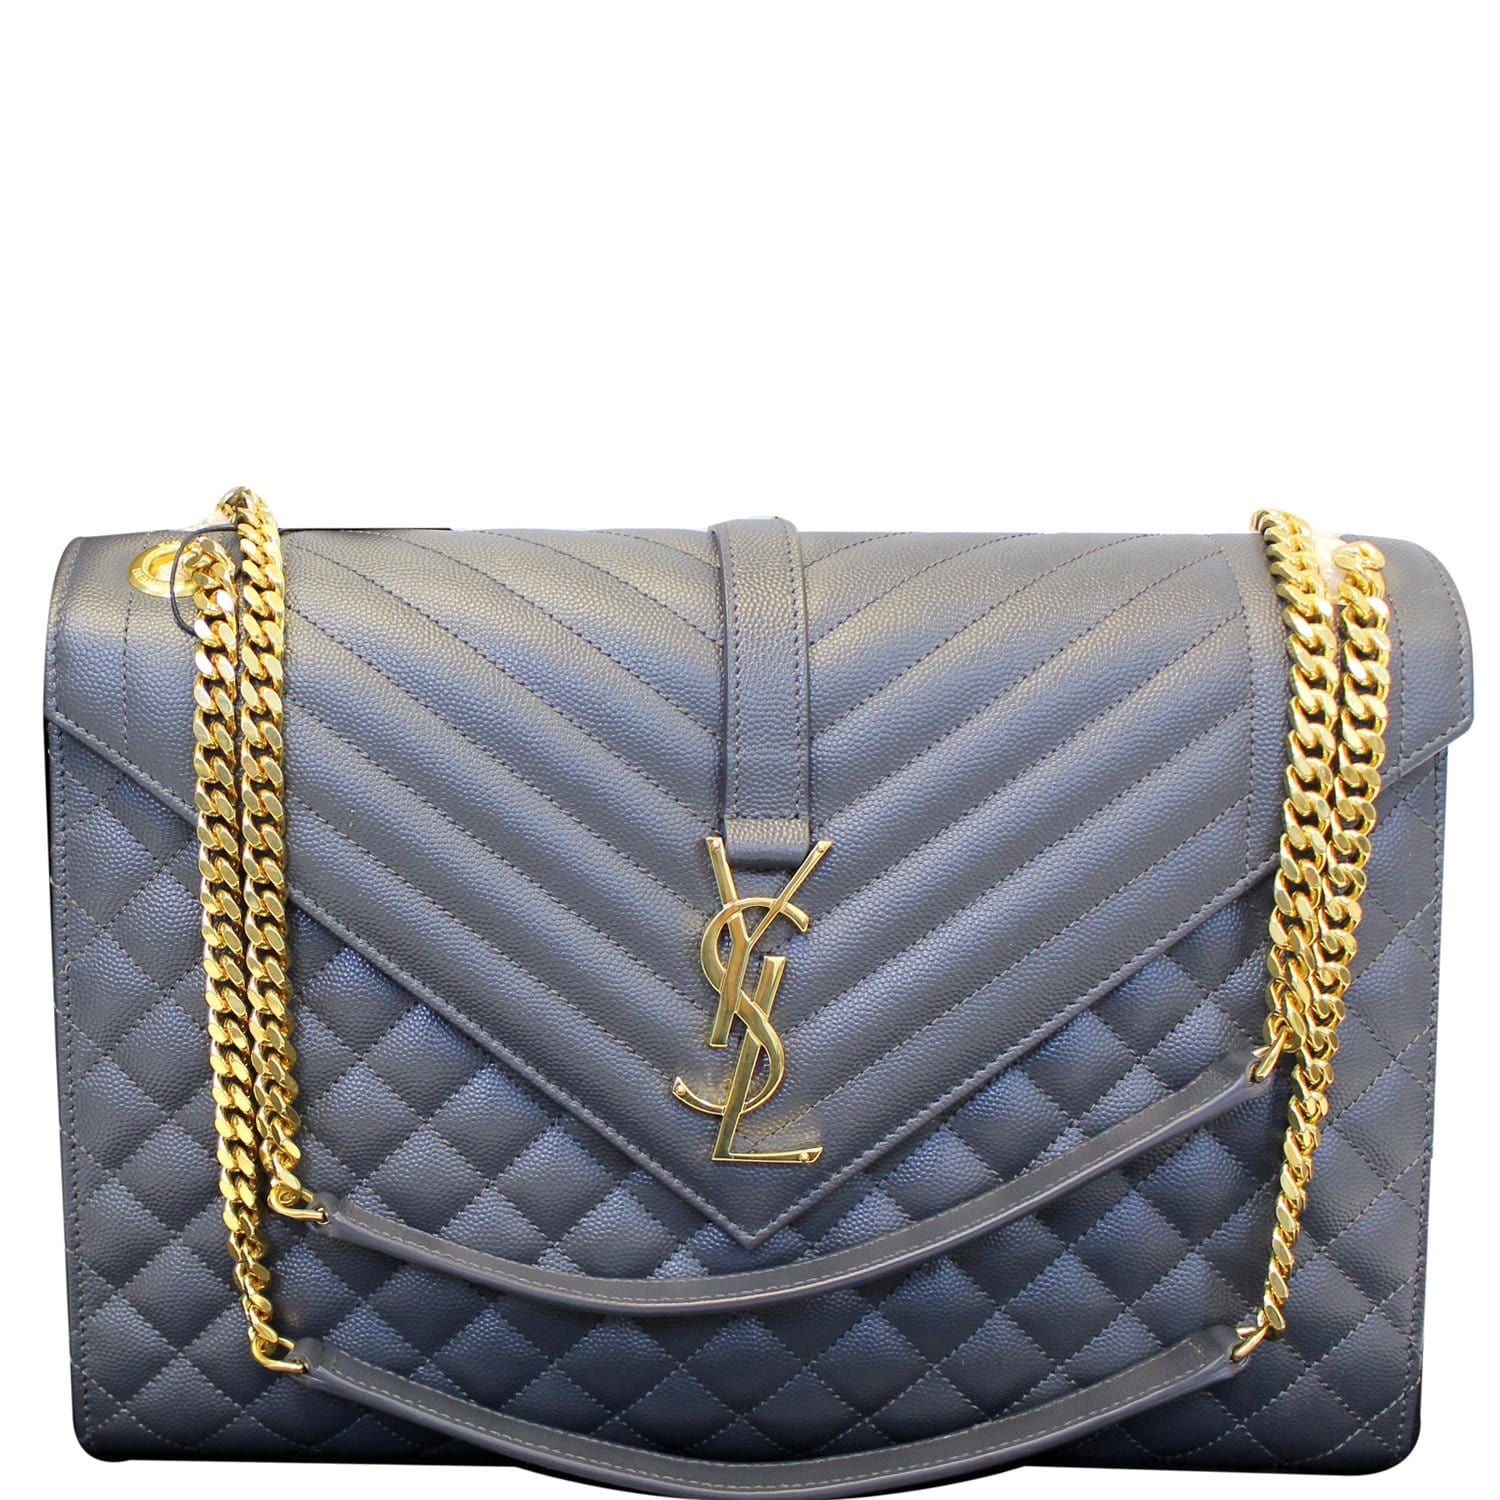 YSL Envelope Bag Review  BEST LARGE LUXURY BAG FOR THE MONEY